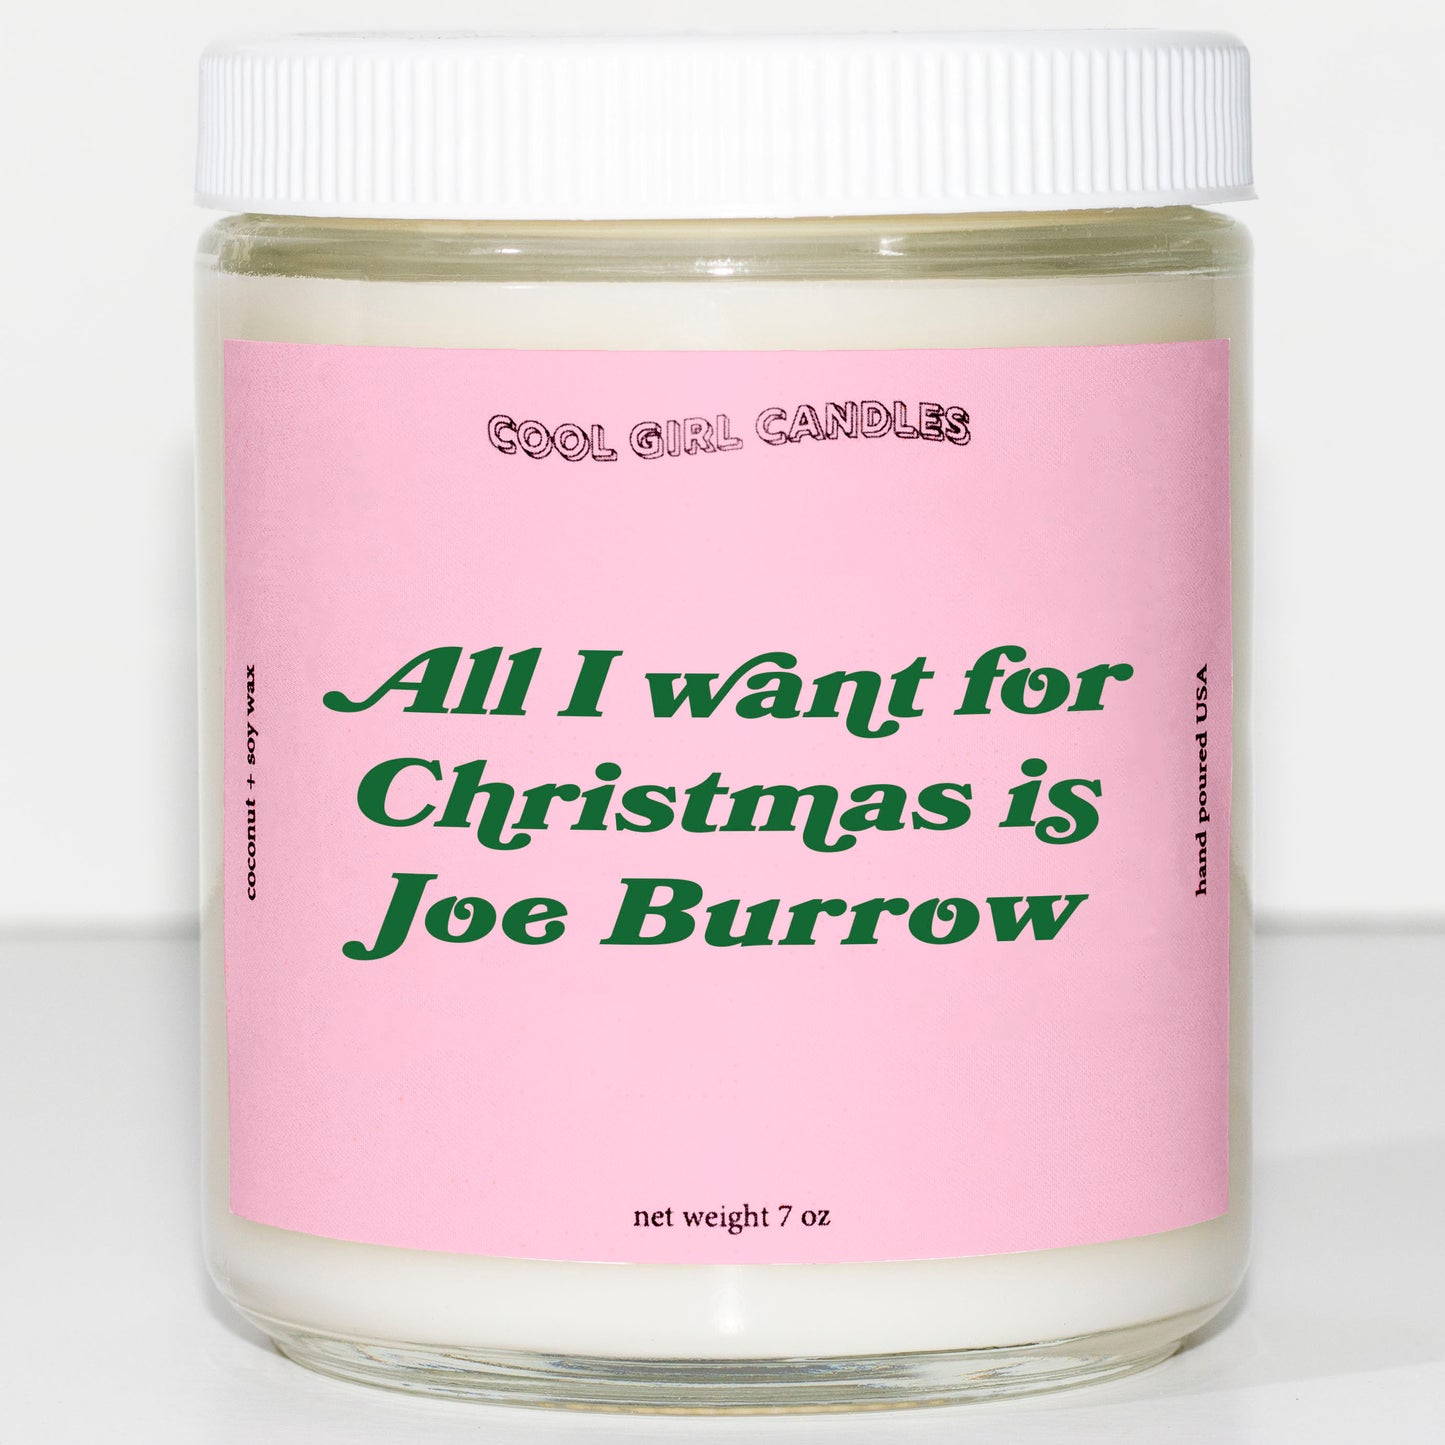 All I want for christmas is Joe burrow candle by cool girl candles